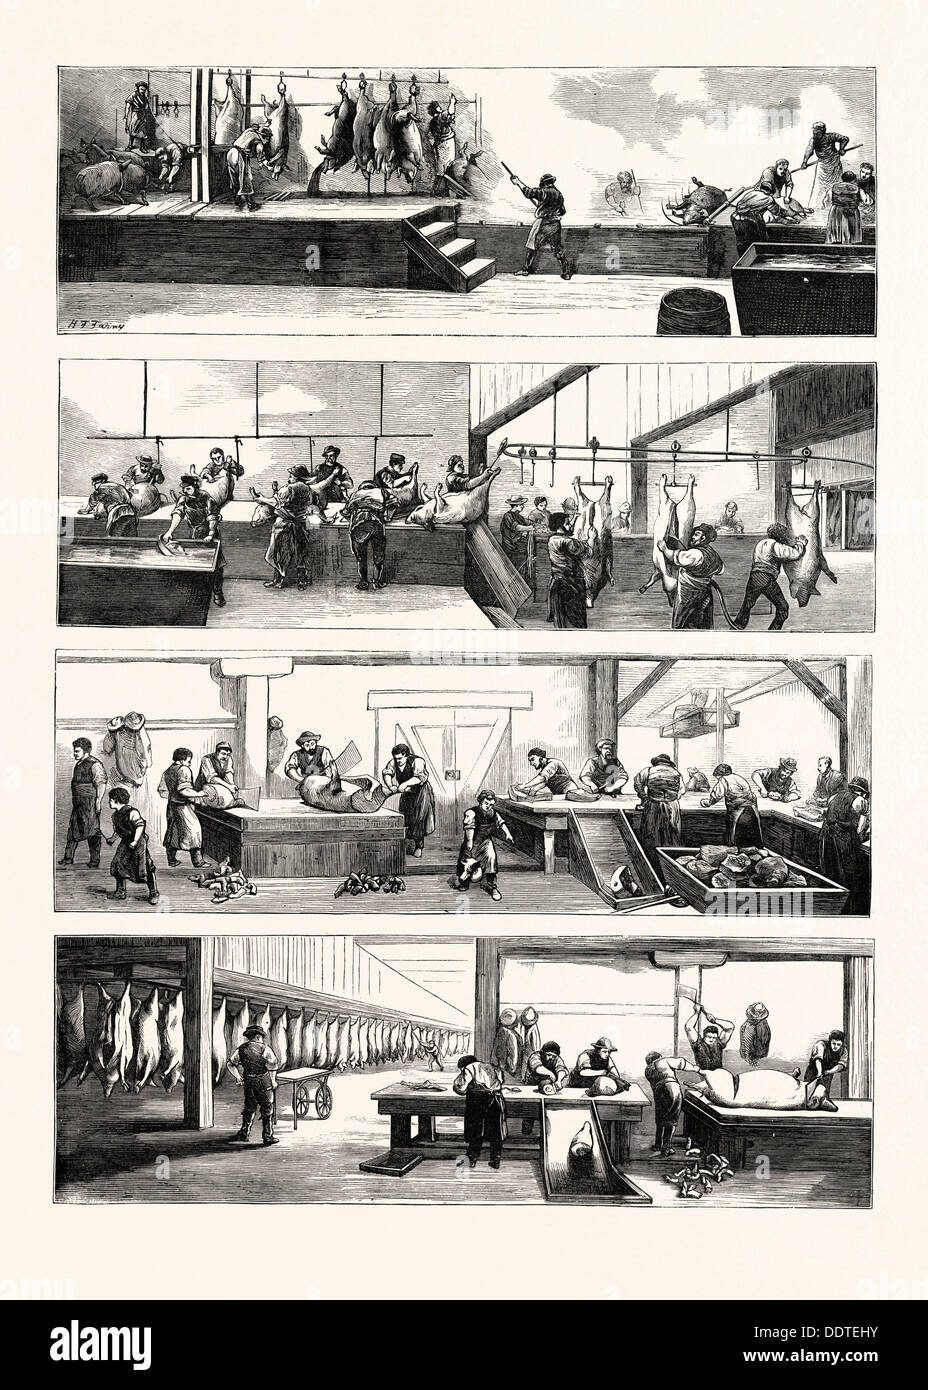 AMERICAN INDUSTRY AND COMMERCE, HOG-SLAUGHTERING AT CINCINNATI, UNITED STATES OF AMERICA, US, USA, 1873 engraving Stock Photo